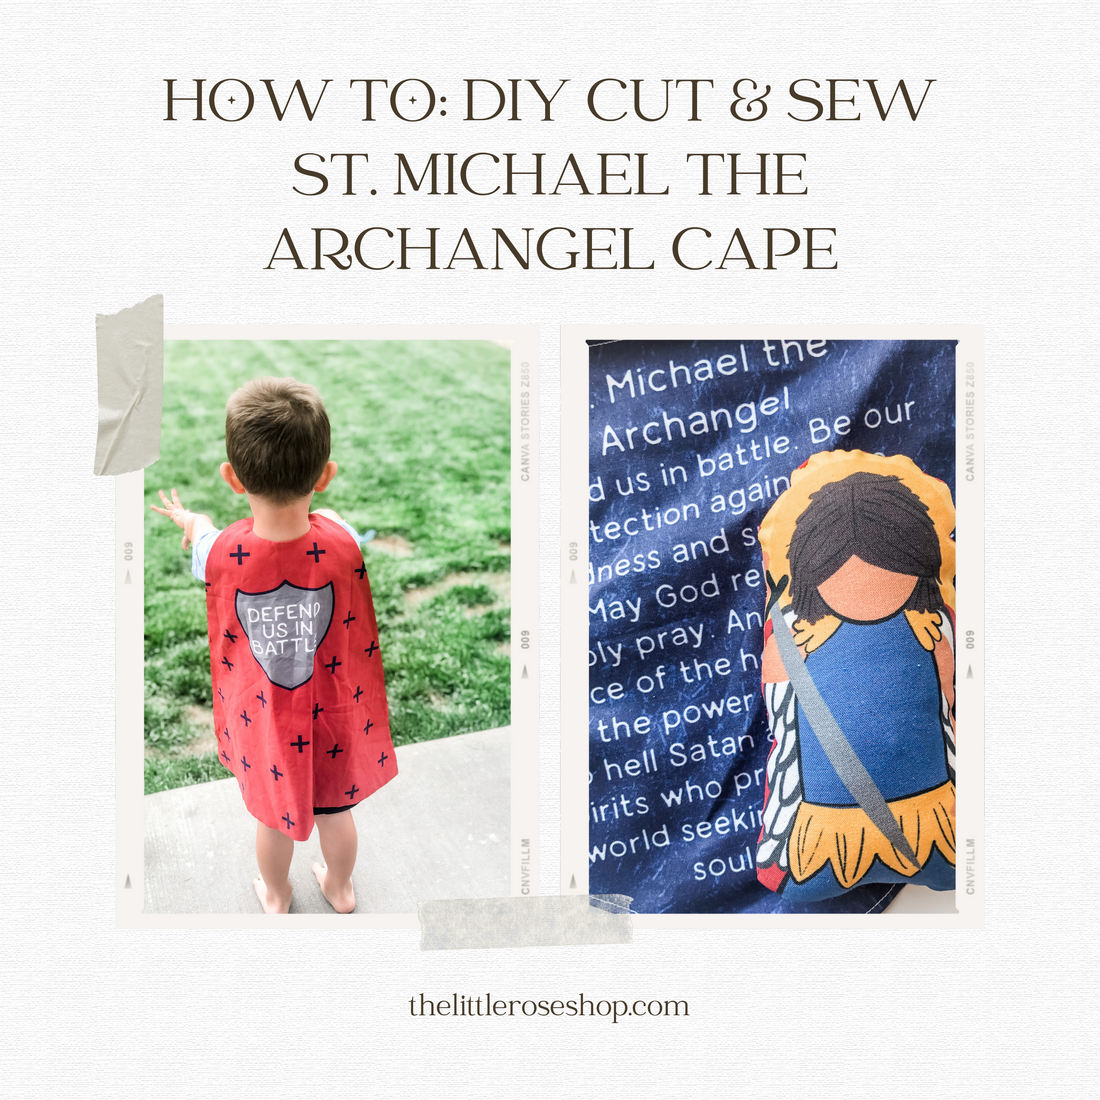 How To: DIY Cut & Sew St. Michael the Archangel Cape